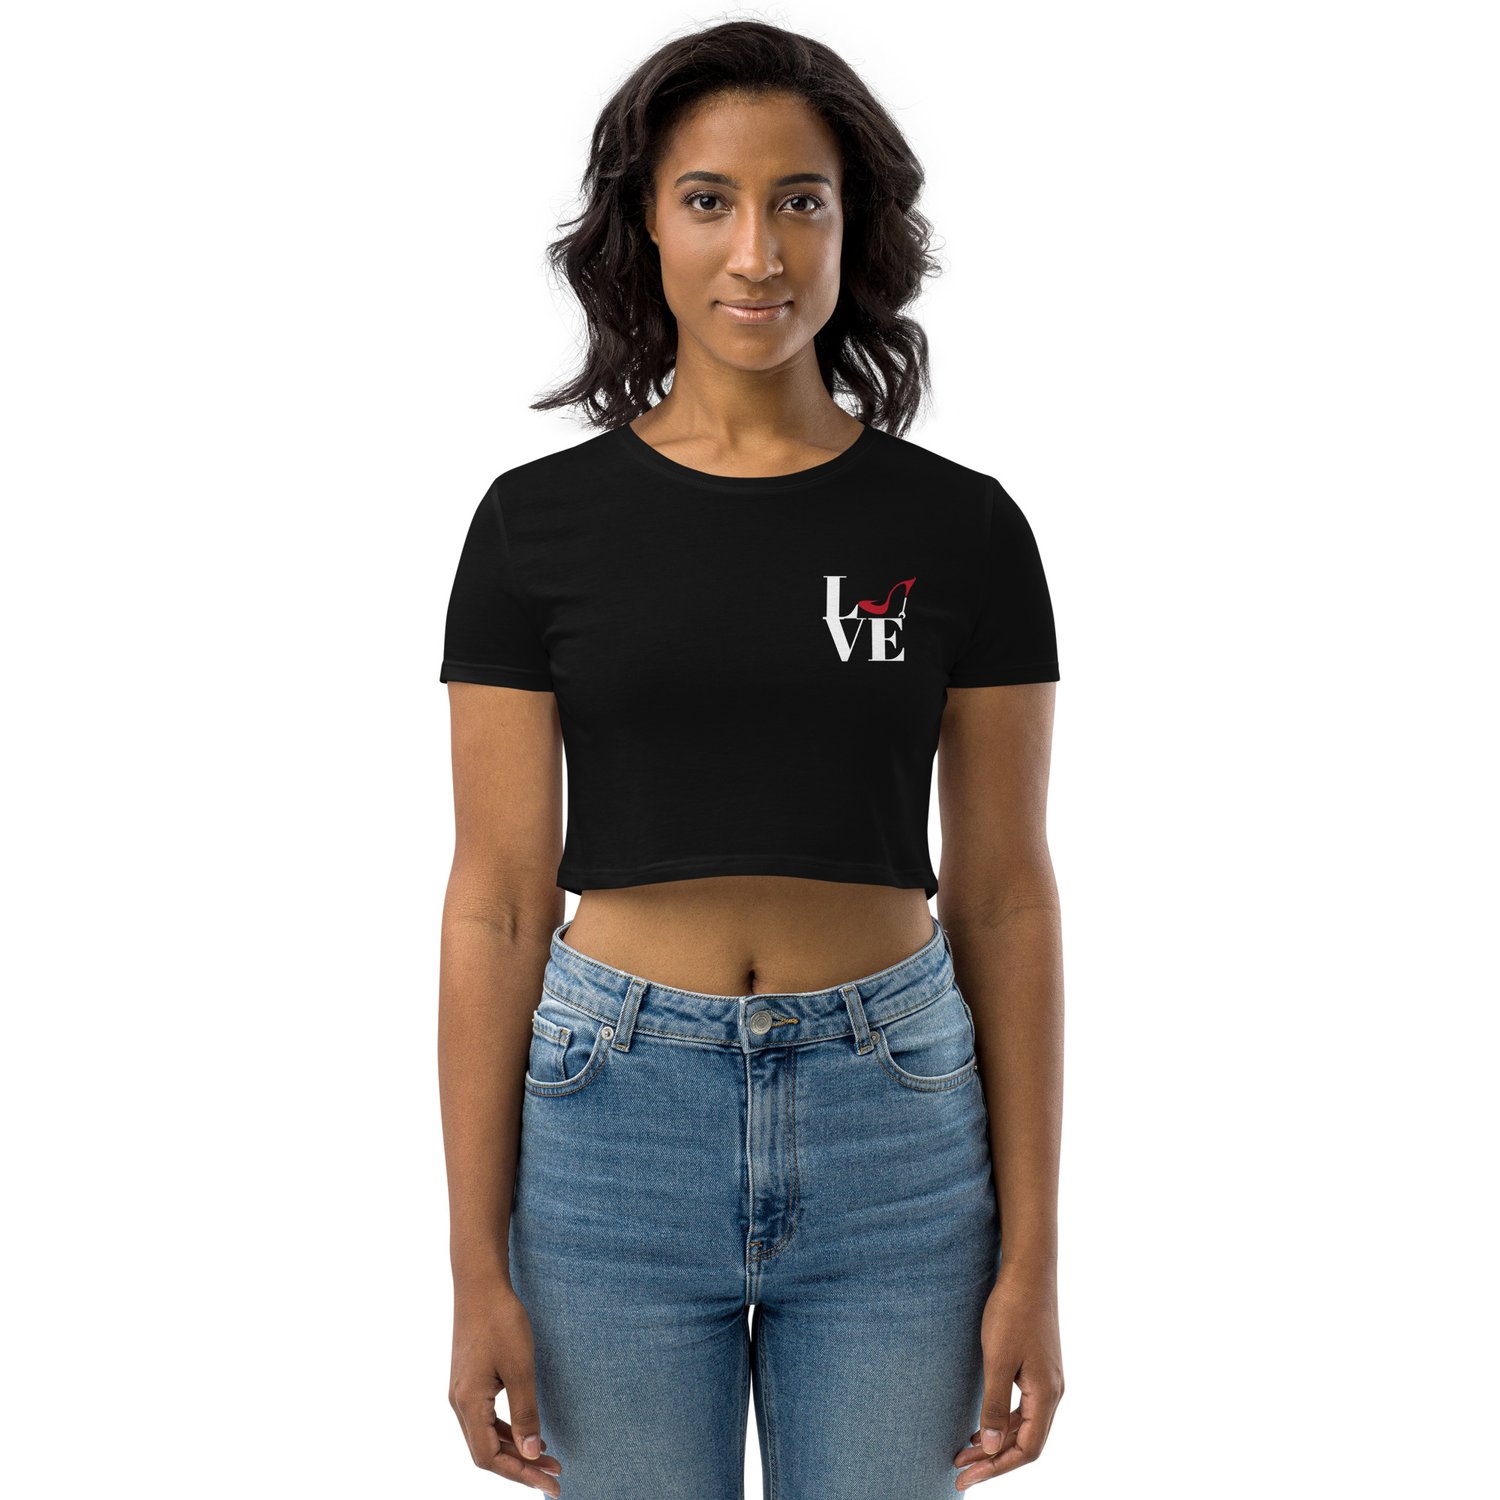 Girls Auto Clinic LOVE Organic Fitted Crop Top - Black — Girls Auto Clinic